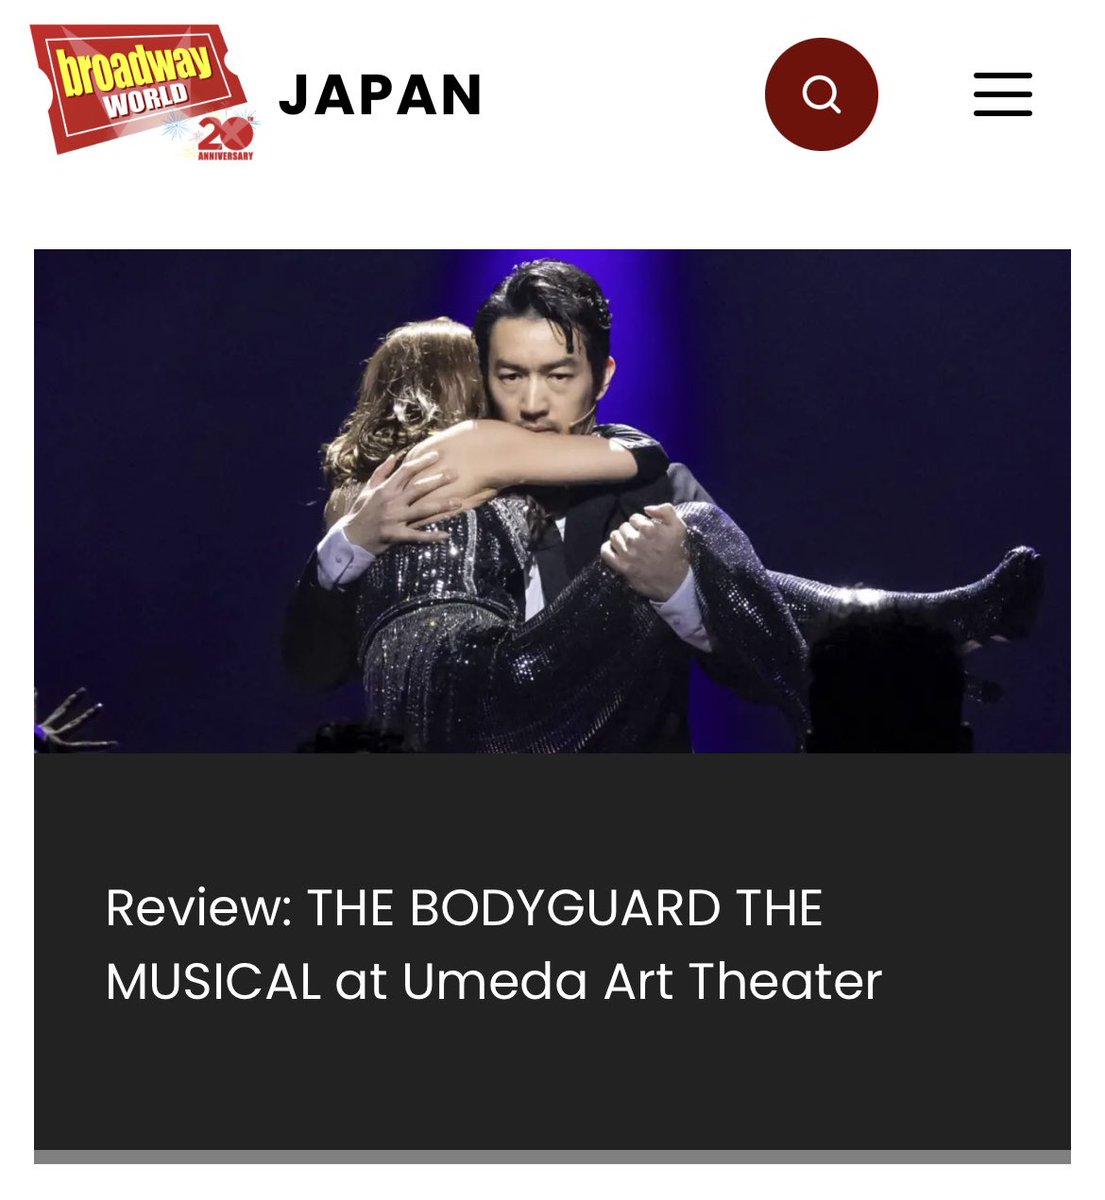 #TheBodyGuardthemusical ‘s #review is now on @BroadwayWorld ! #WhitneyHouston and   #KevinCostner ‘s iconic movie, #TheBodyguard is back as #musical in #Japan ✨

@MayJamileh @BodyguardNIPPON